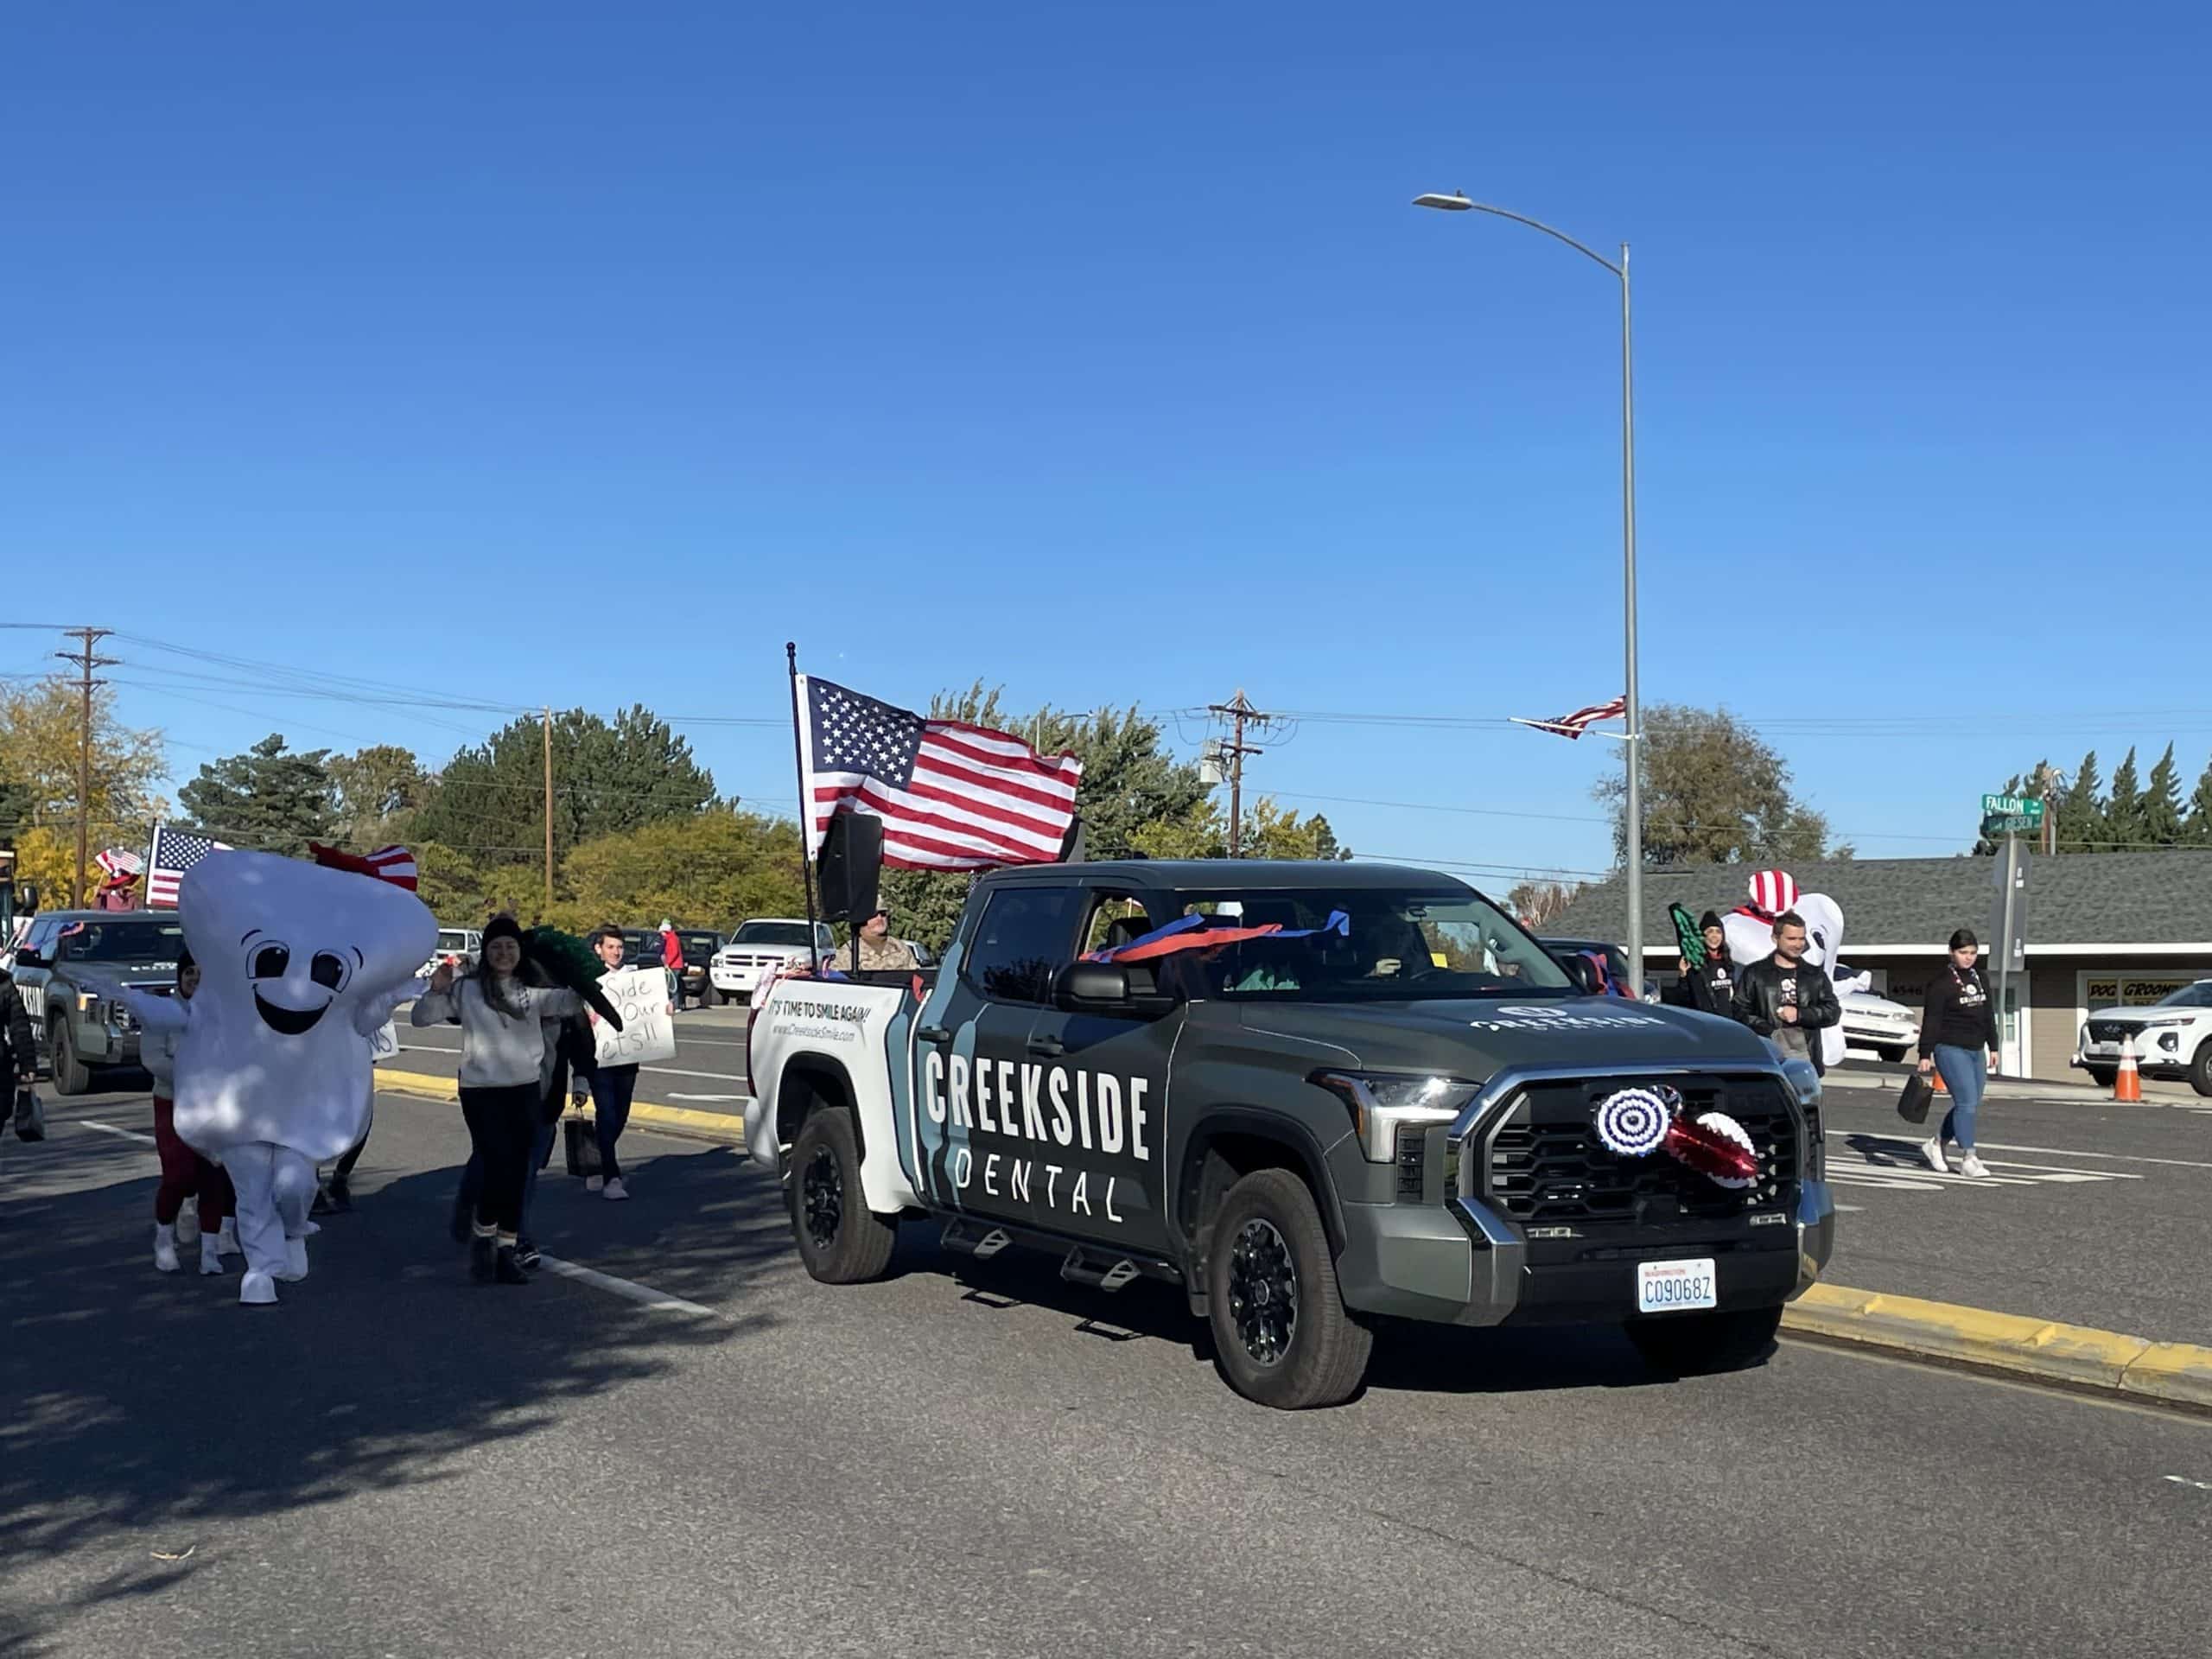 Creekside Dental team joins the Veterans Day Parade